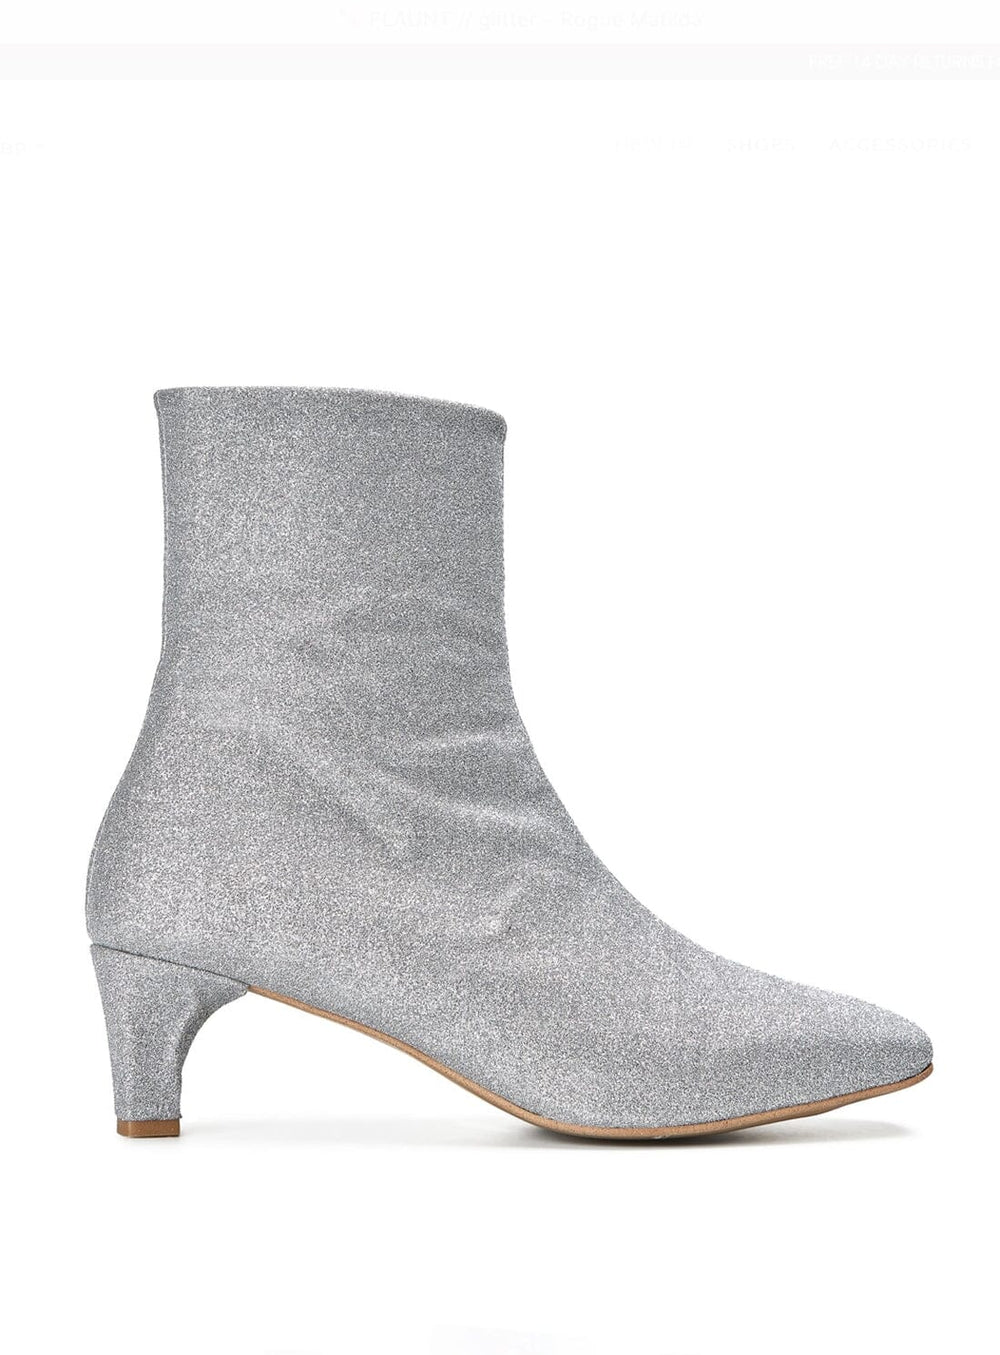 Flaunt Ankle Boot in Silver Glitter Shoes YBDFinds 